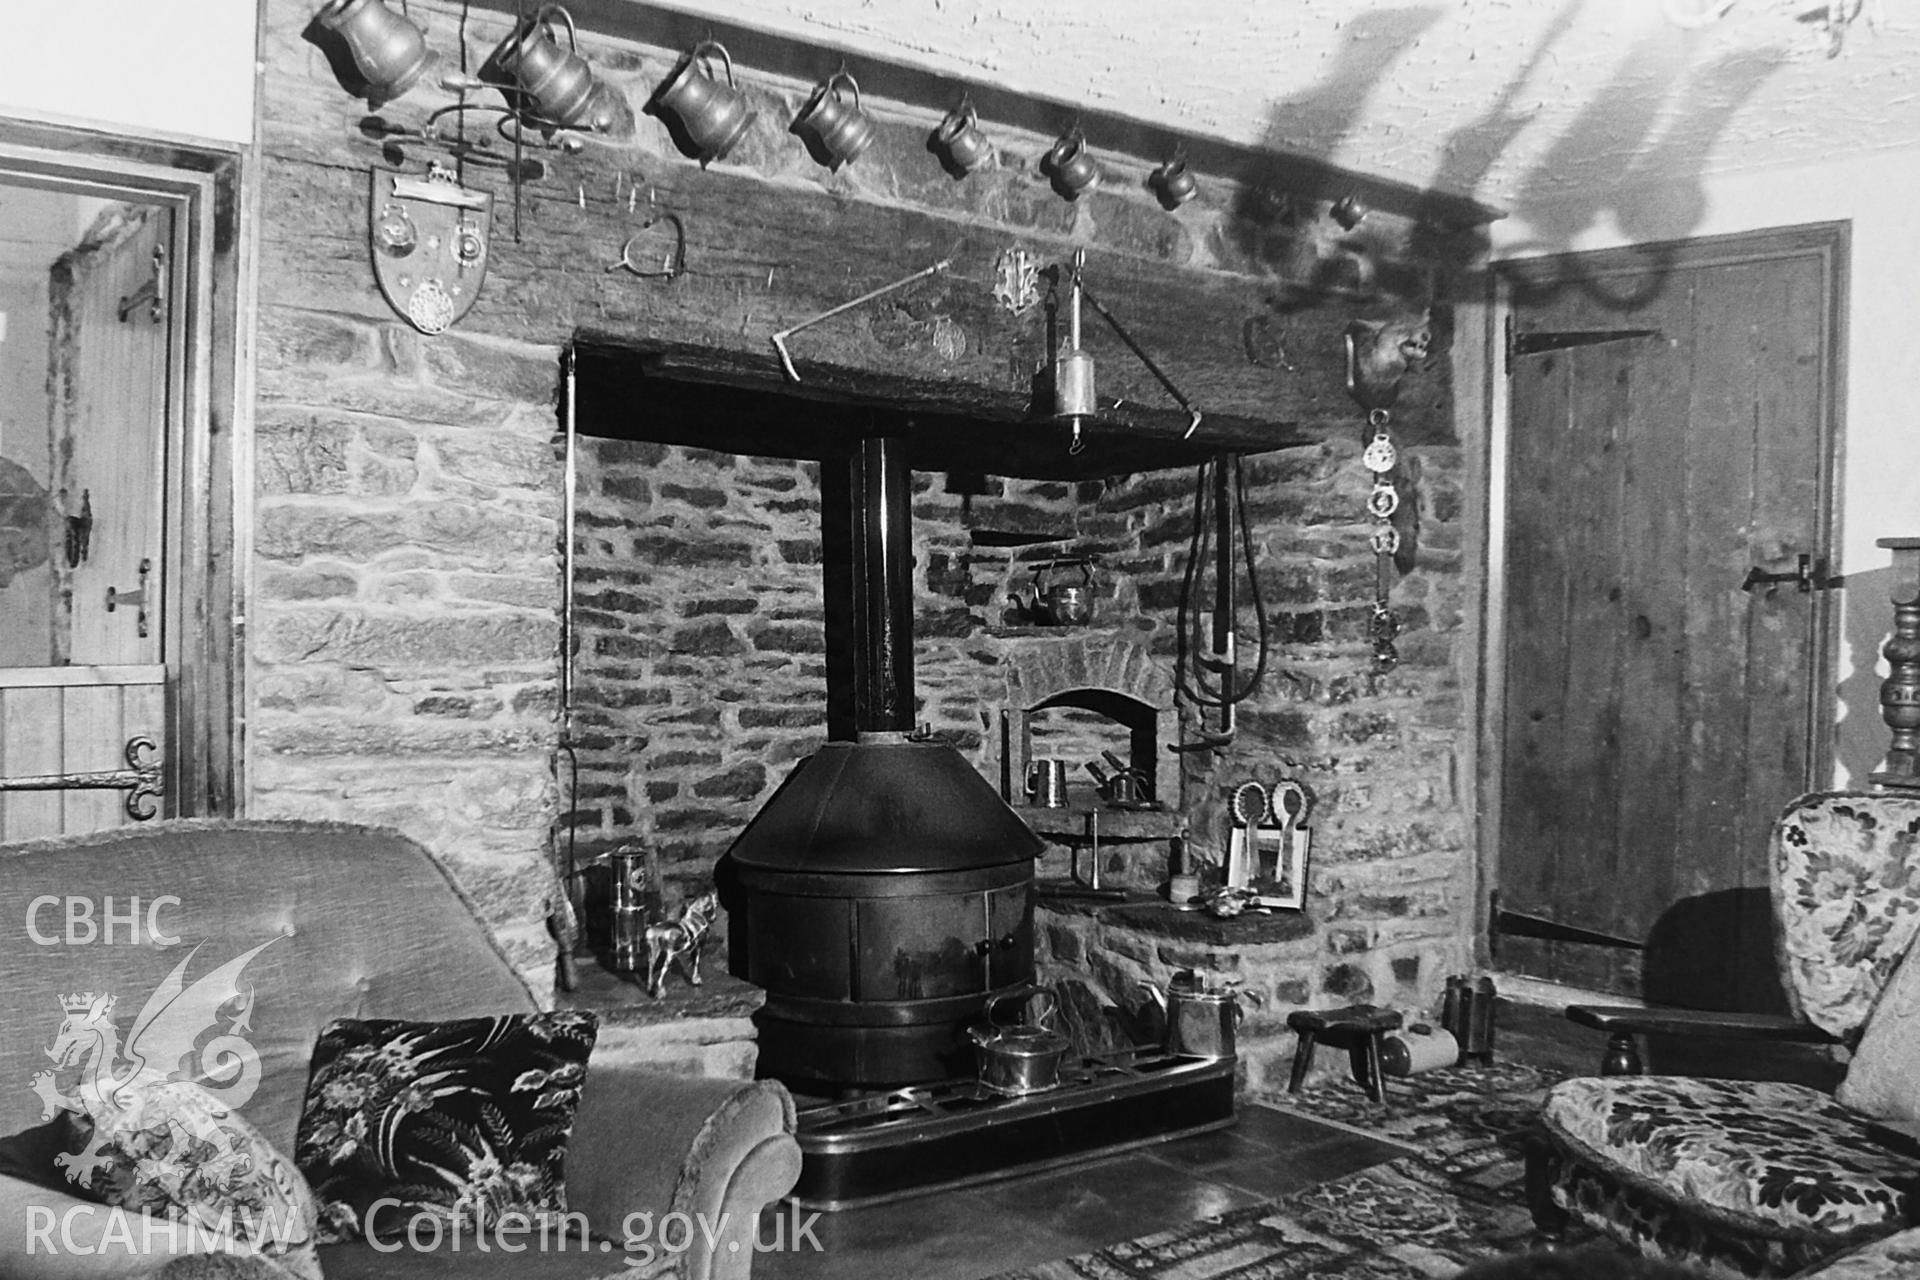 Black and white photo showing the fireplace at Glyncoli Farm, taken by Paul R. Davis, 1989.